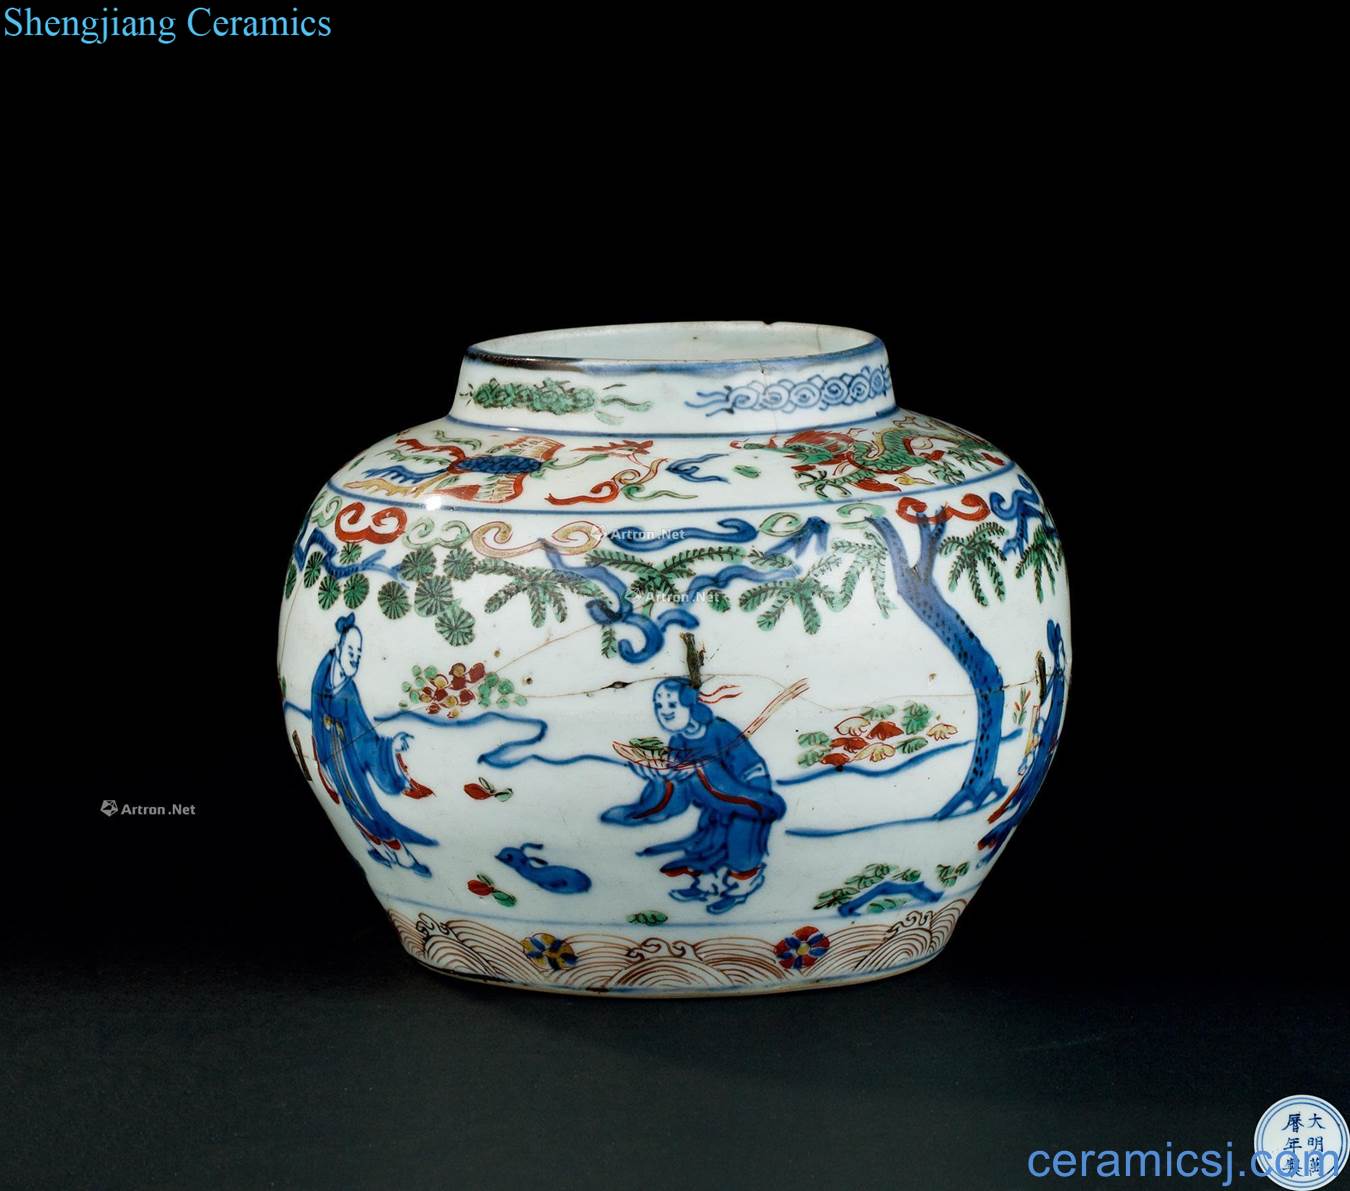 In the Ming dynasty (1368-1644) grain bottle colorful characters